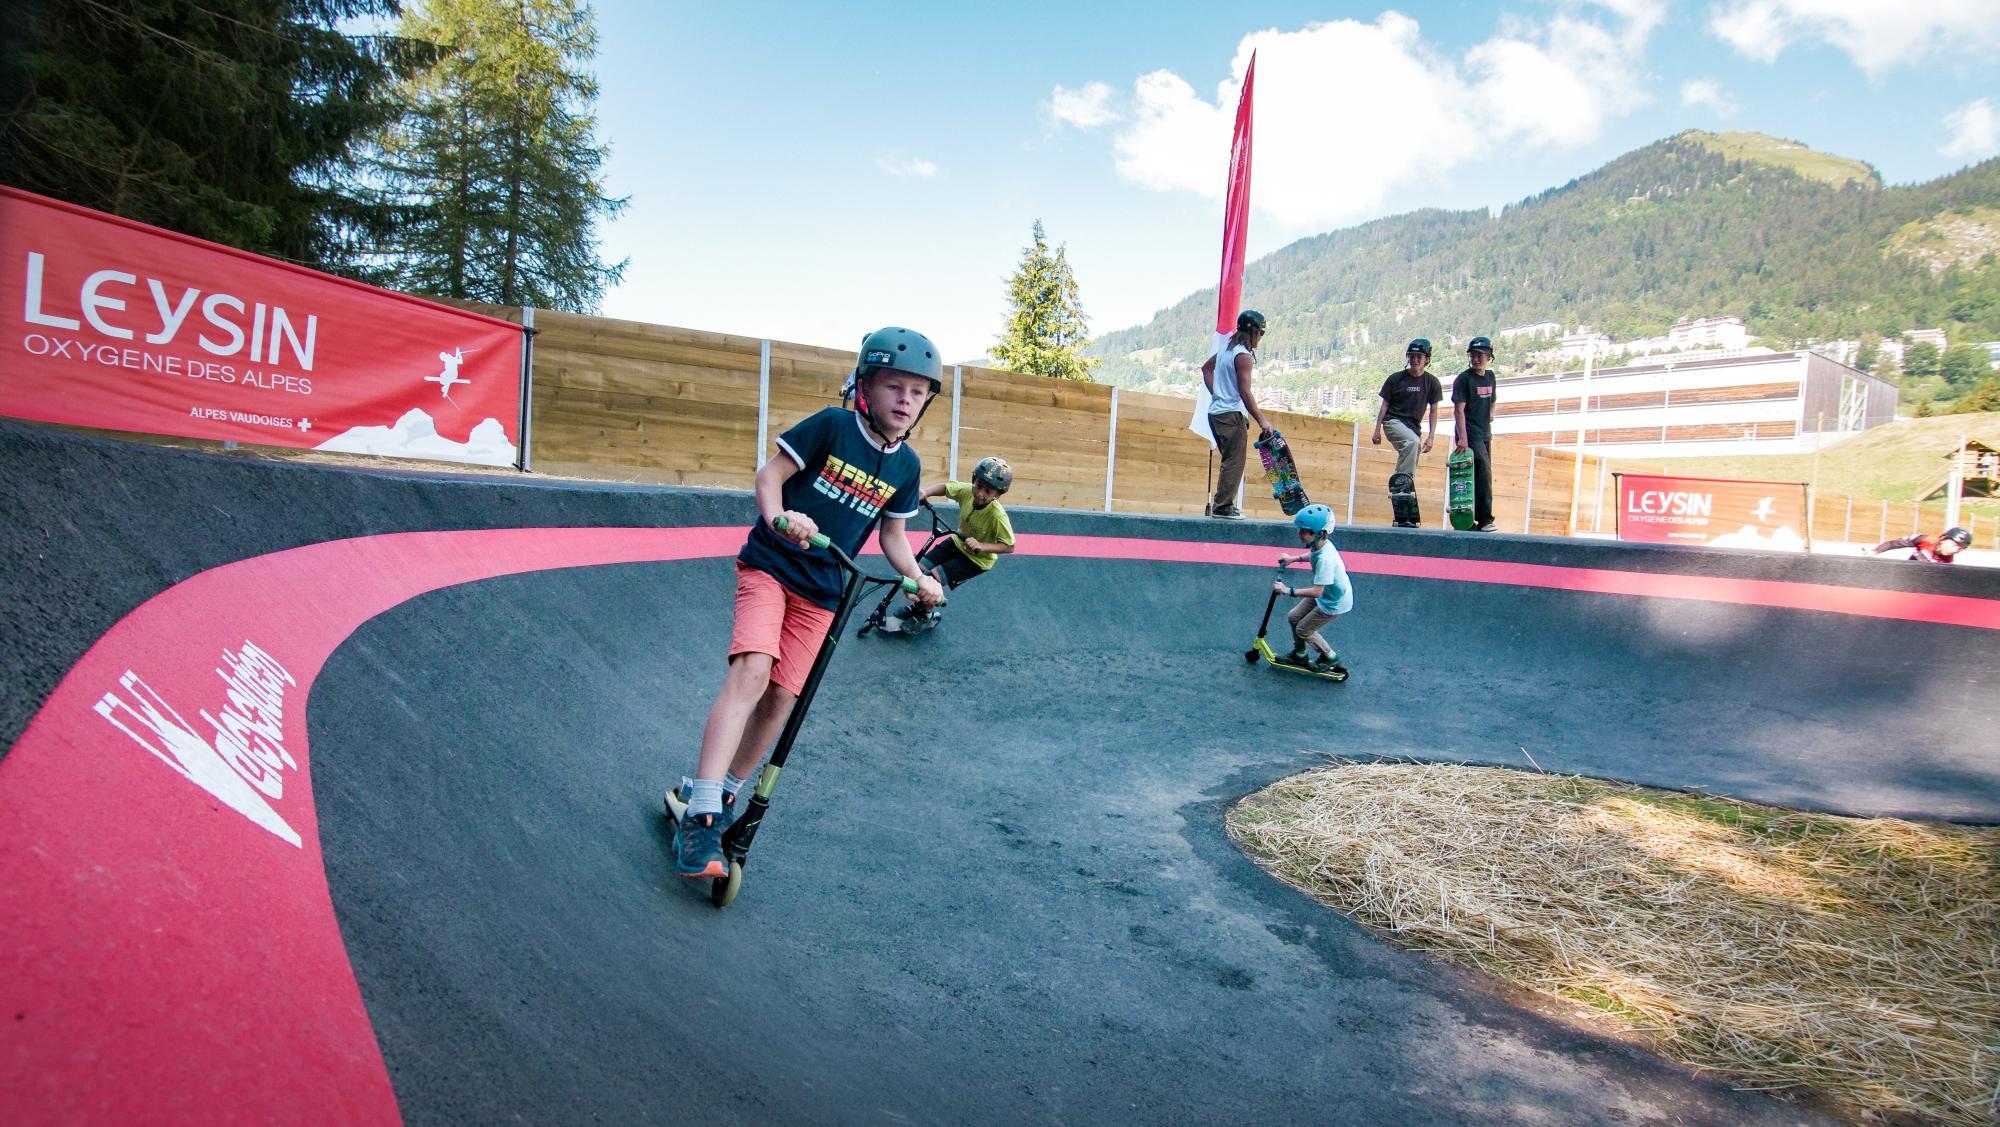 Child on scooter on the pumptrack - Leysin - summer